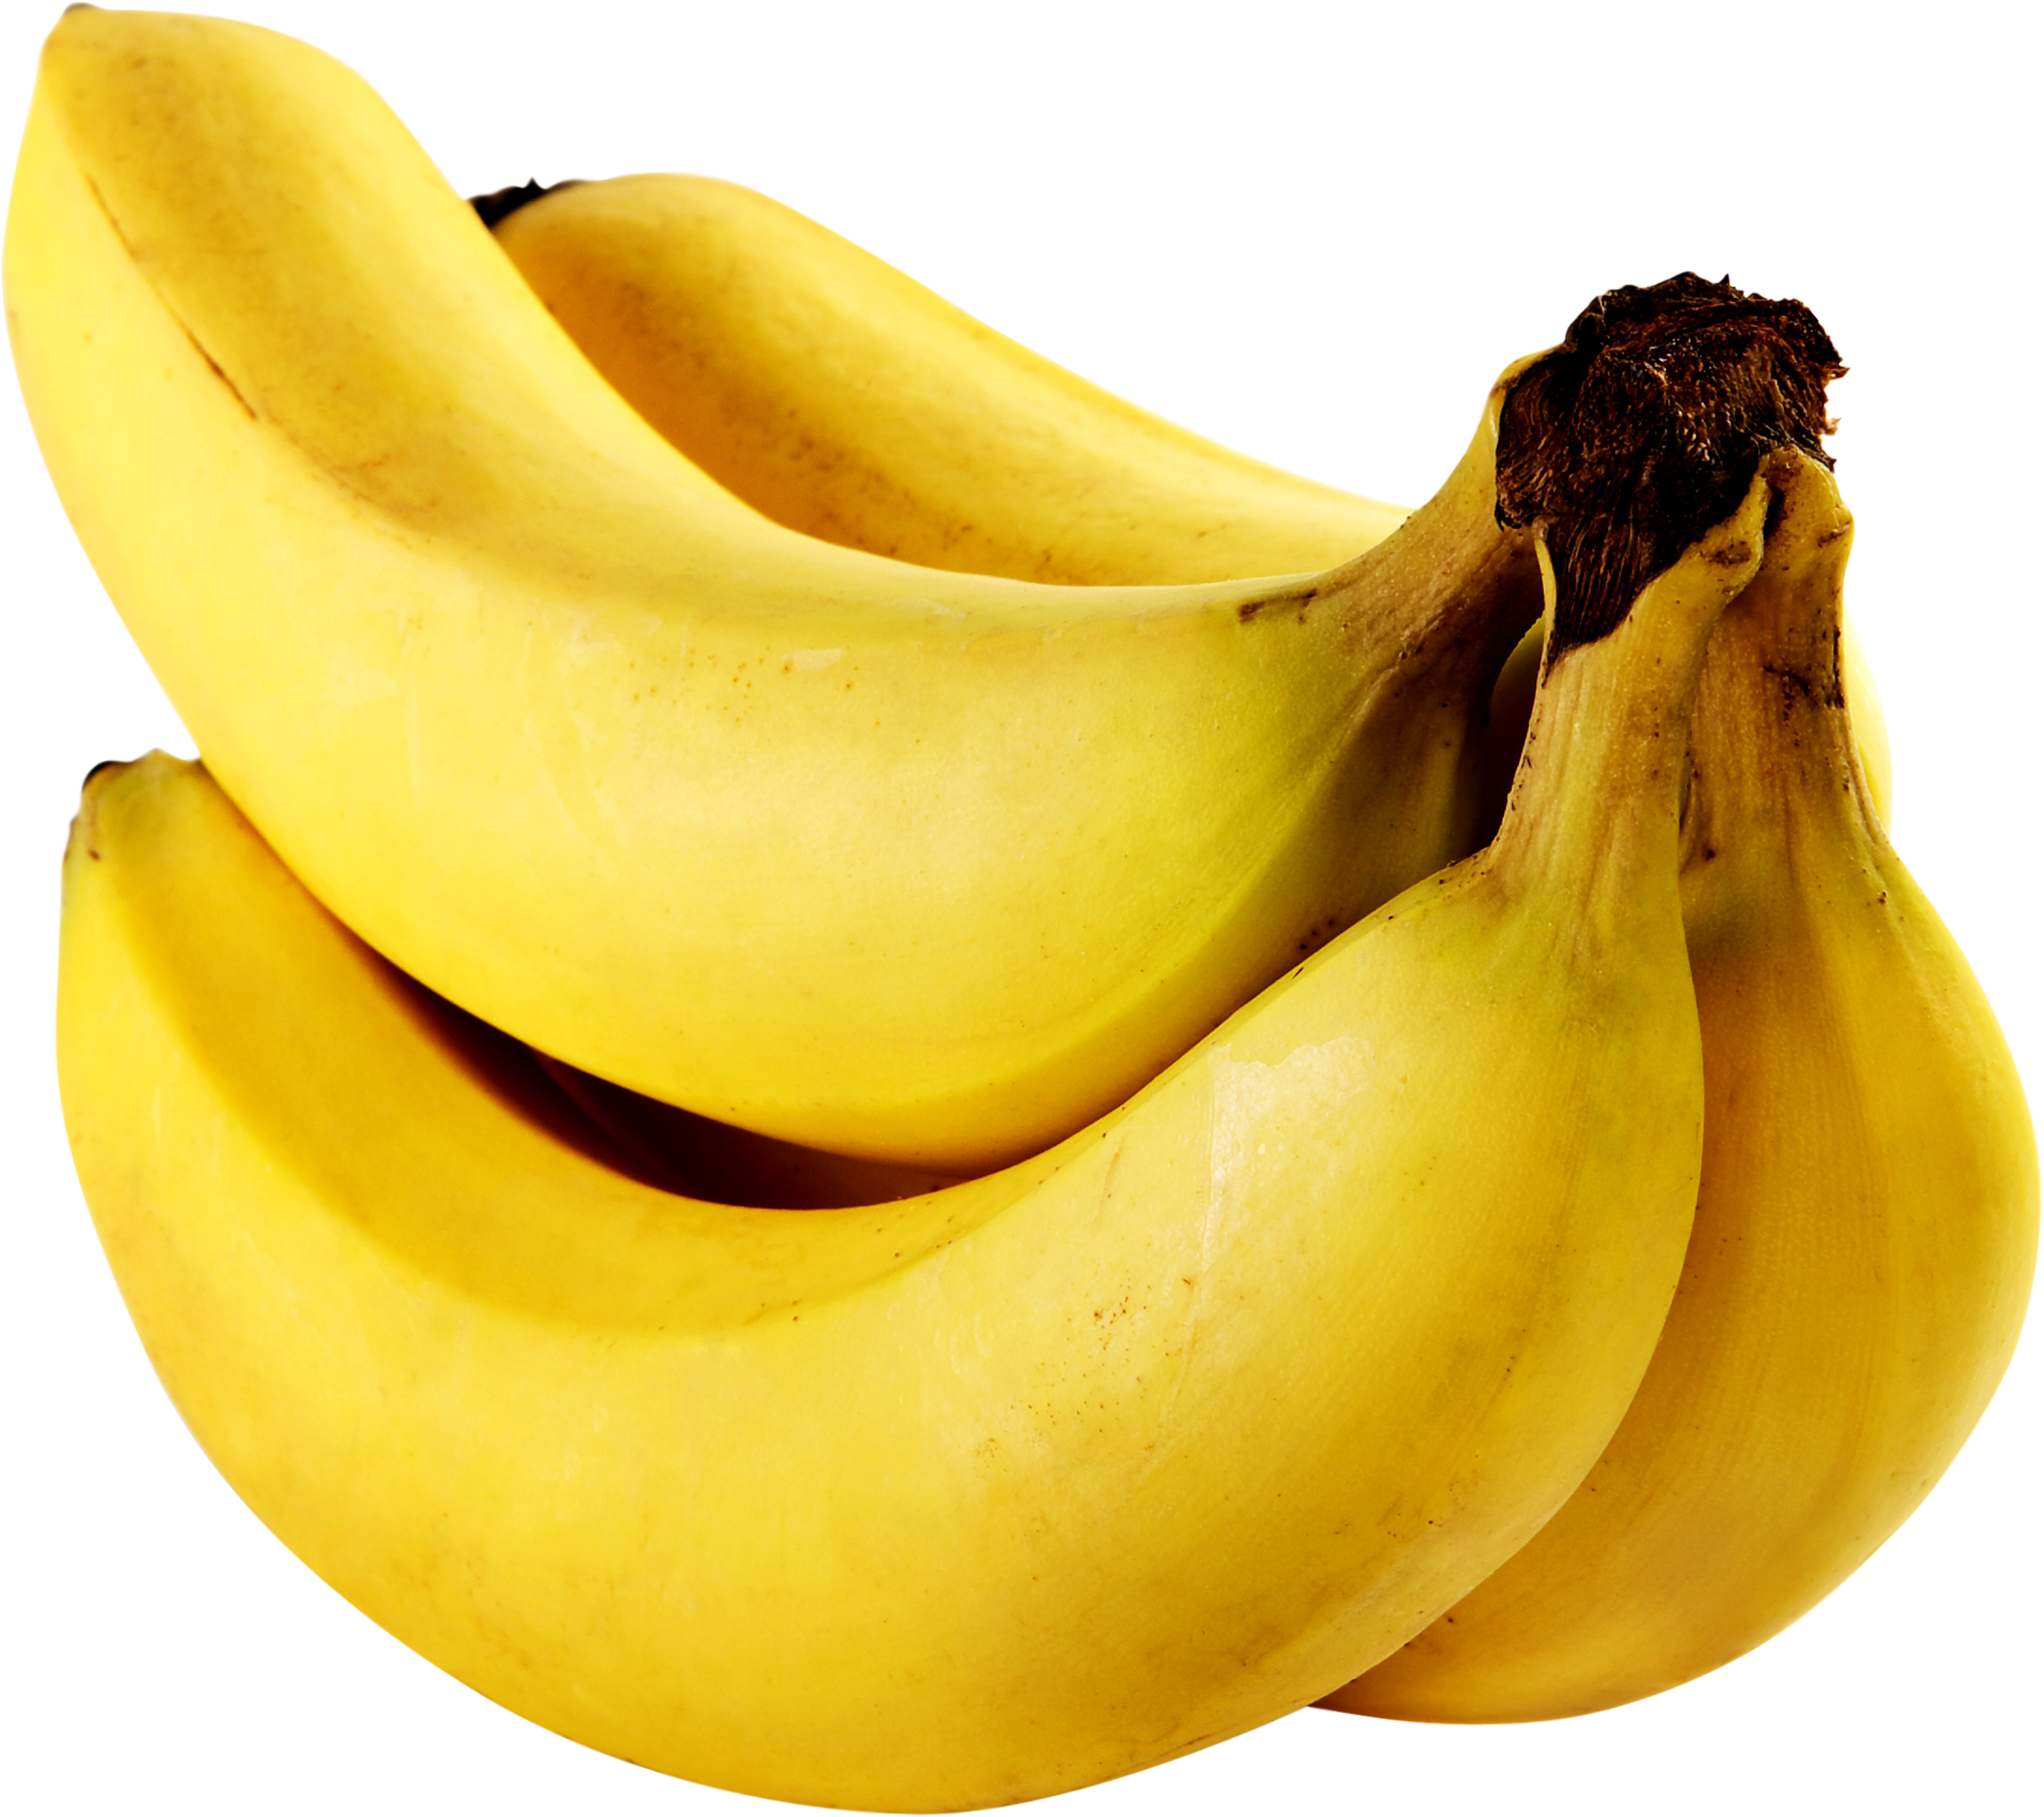 Png image free picture. Nutrition clipart banana